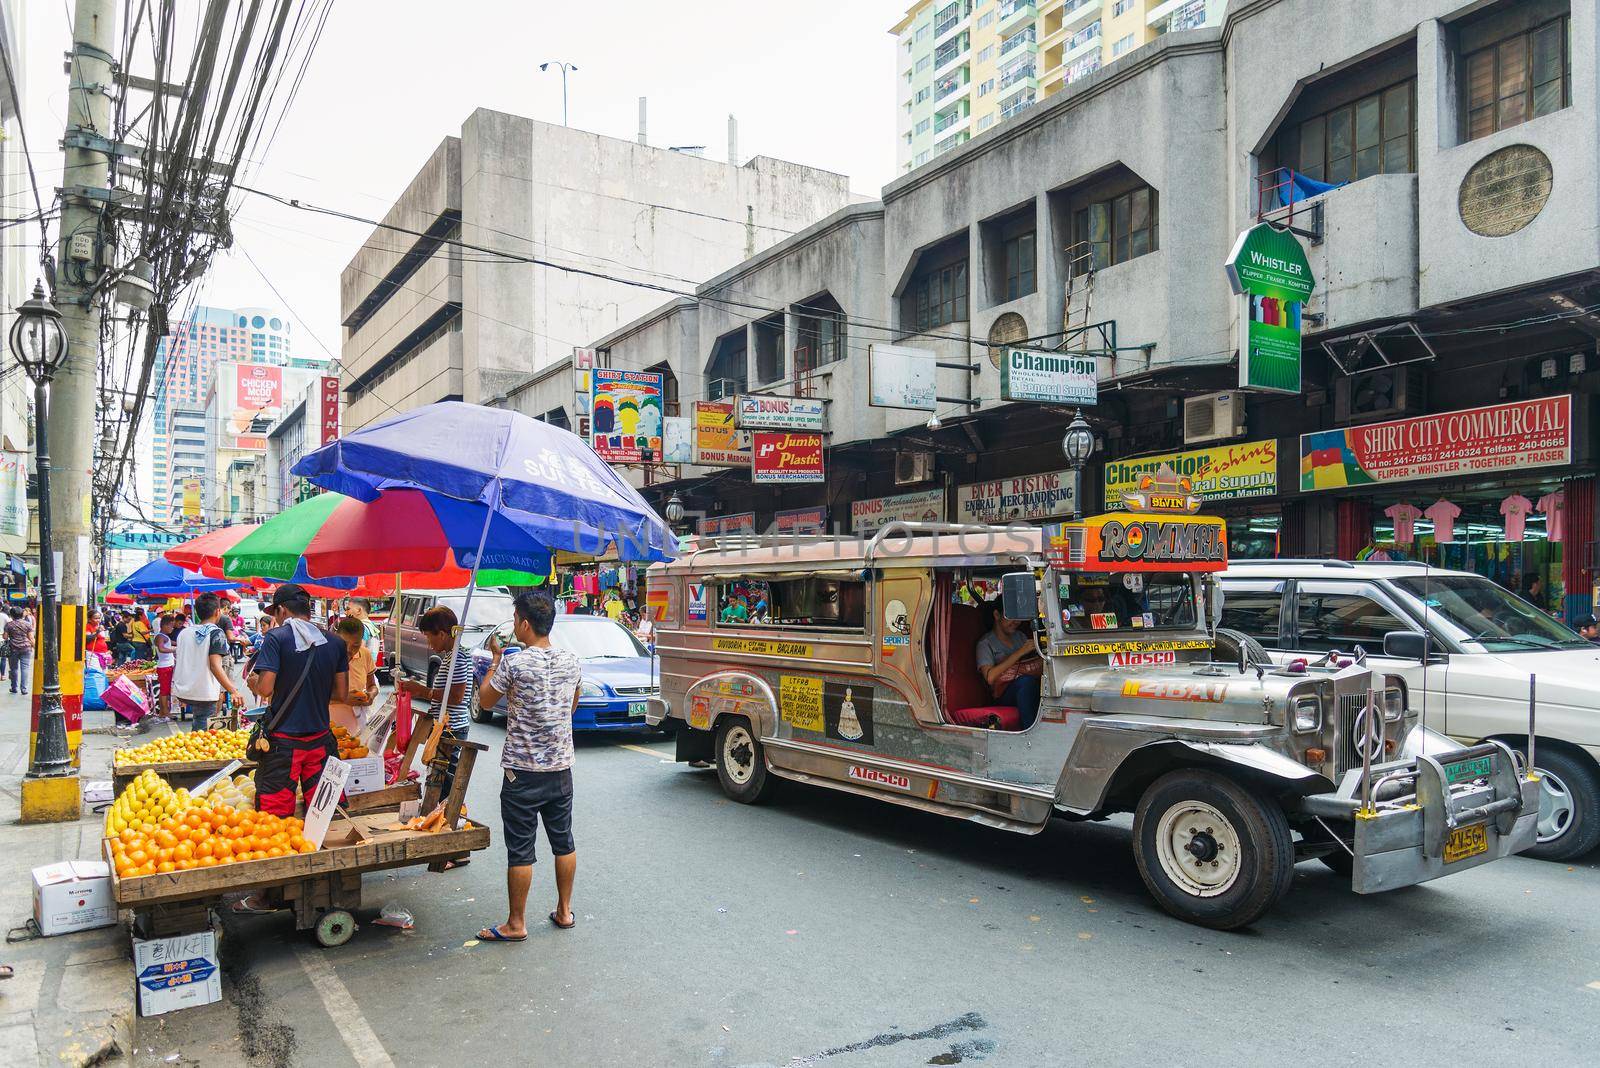 jeepney bus in manila chinatown in philippines by jackmalipan